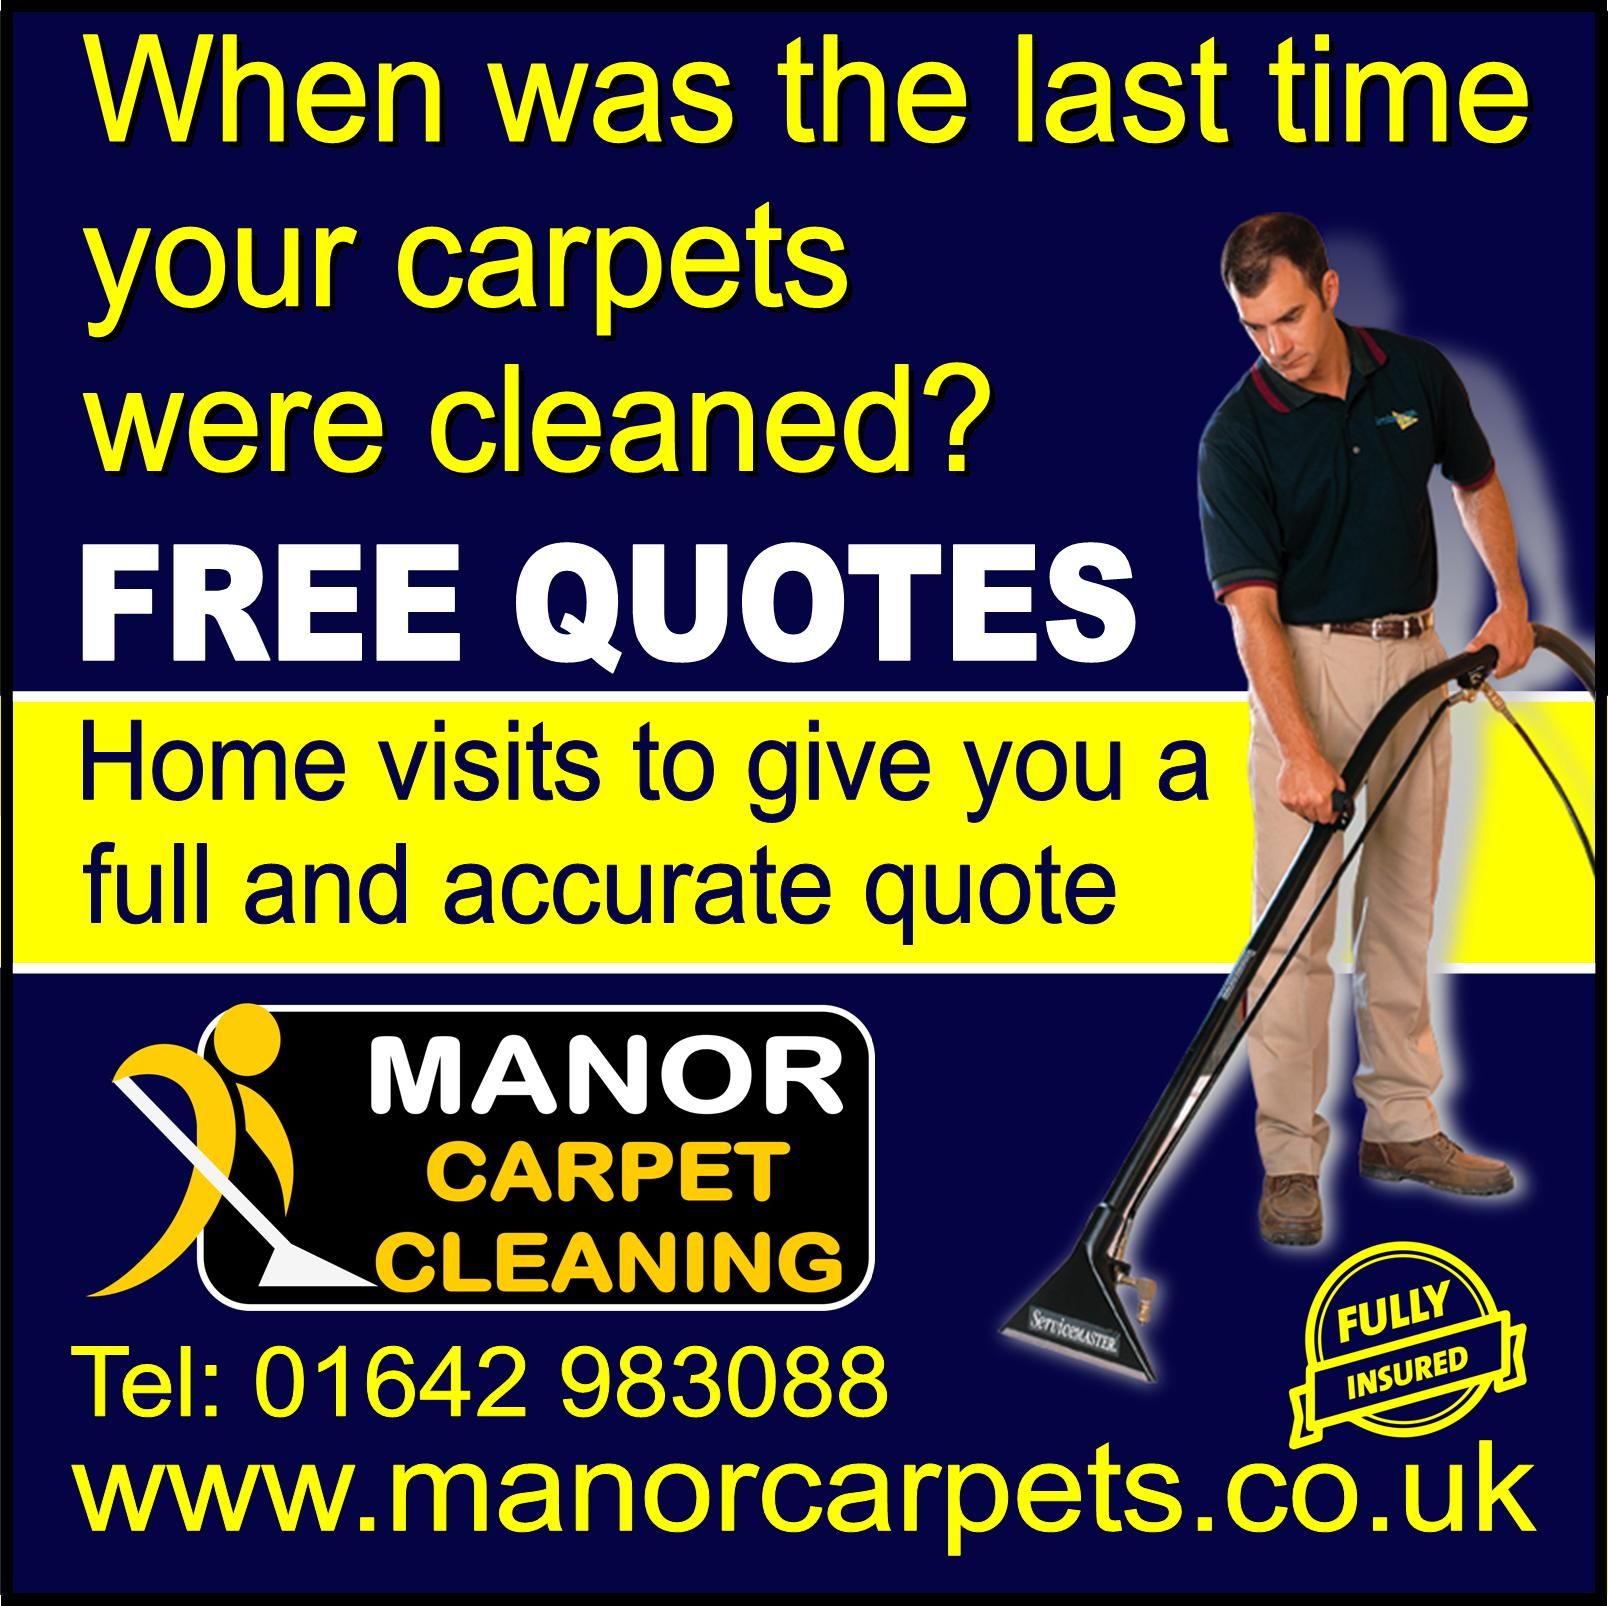 Carpet cleaning in Stockton on Tees, Middlesbrough, Redcar, Thornaby, Hartlepool, Darlington, Guisborough. Free quotes and advice